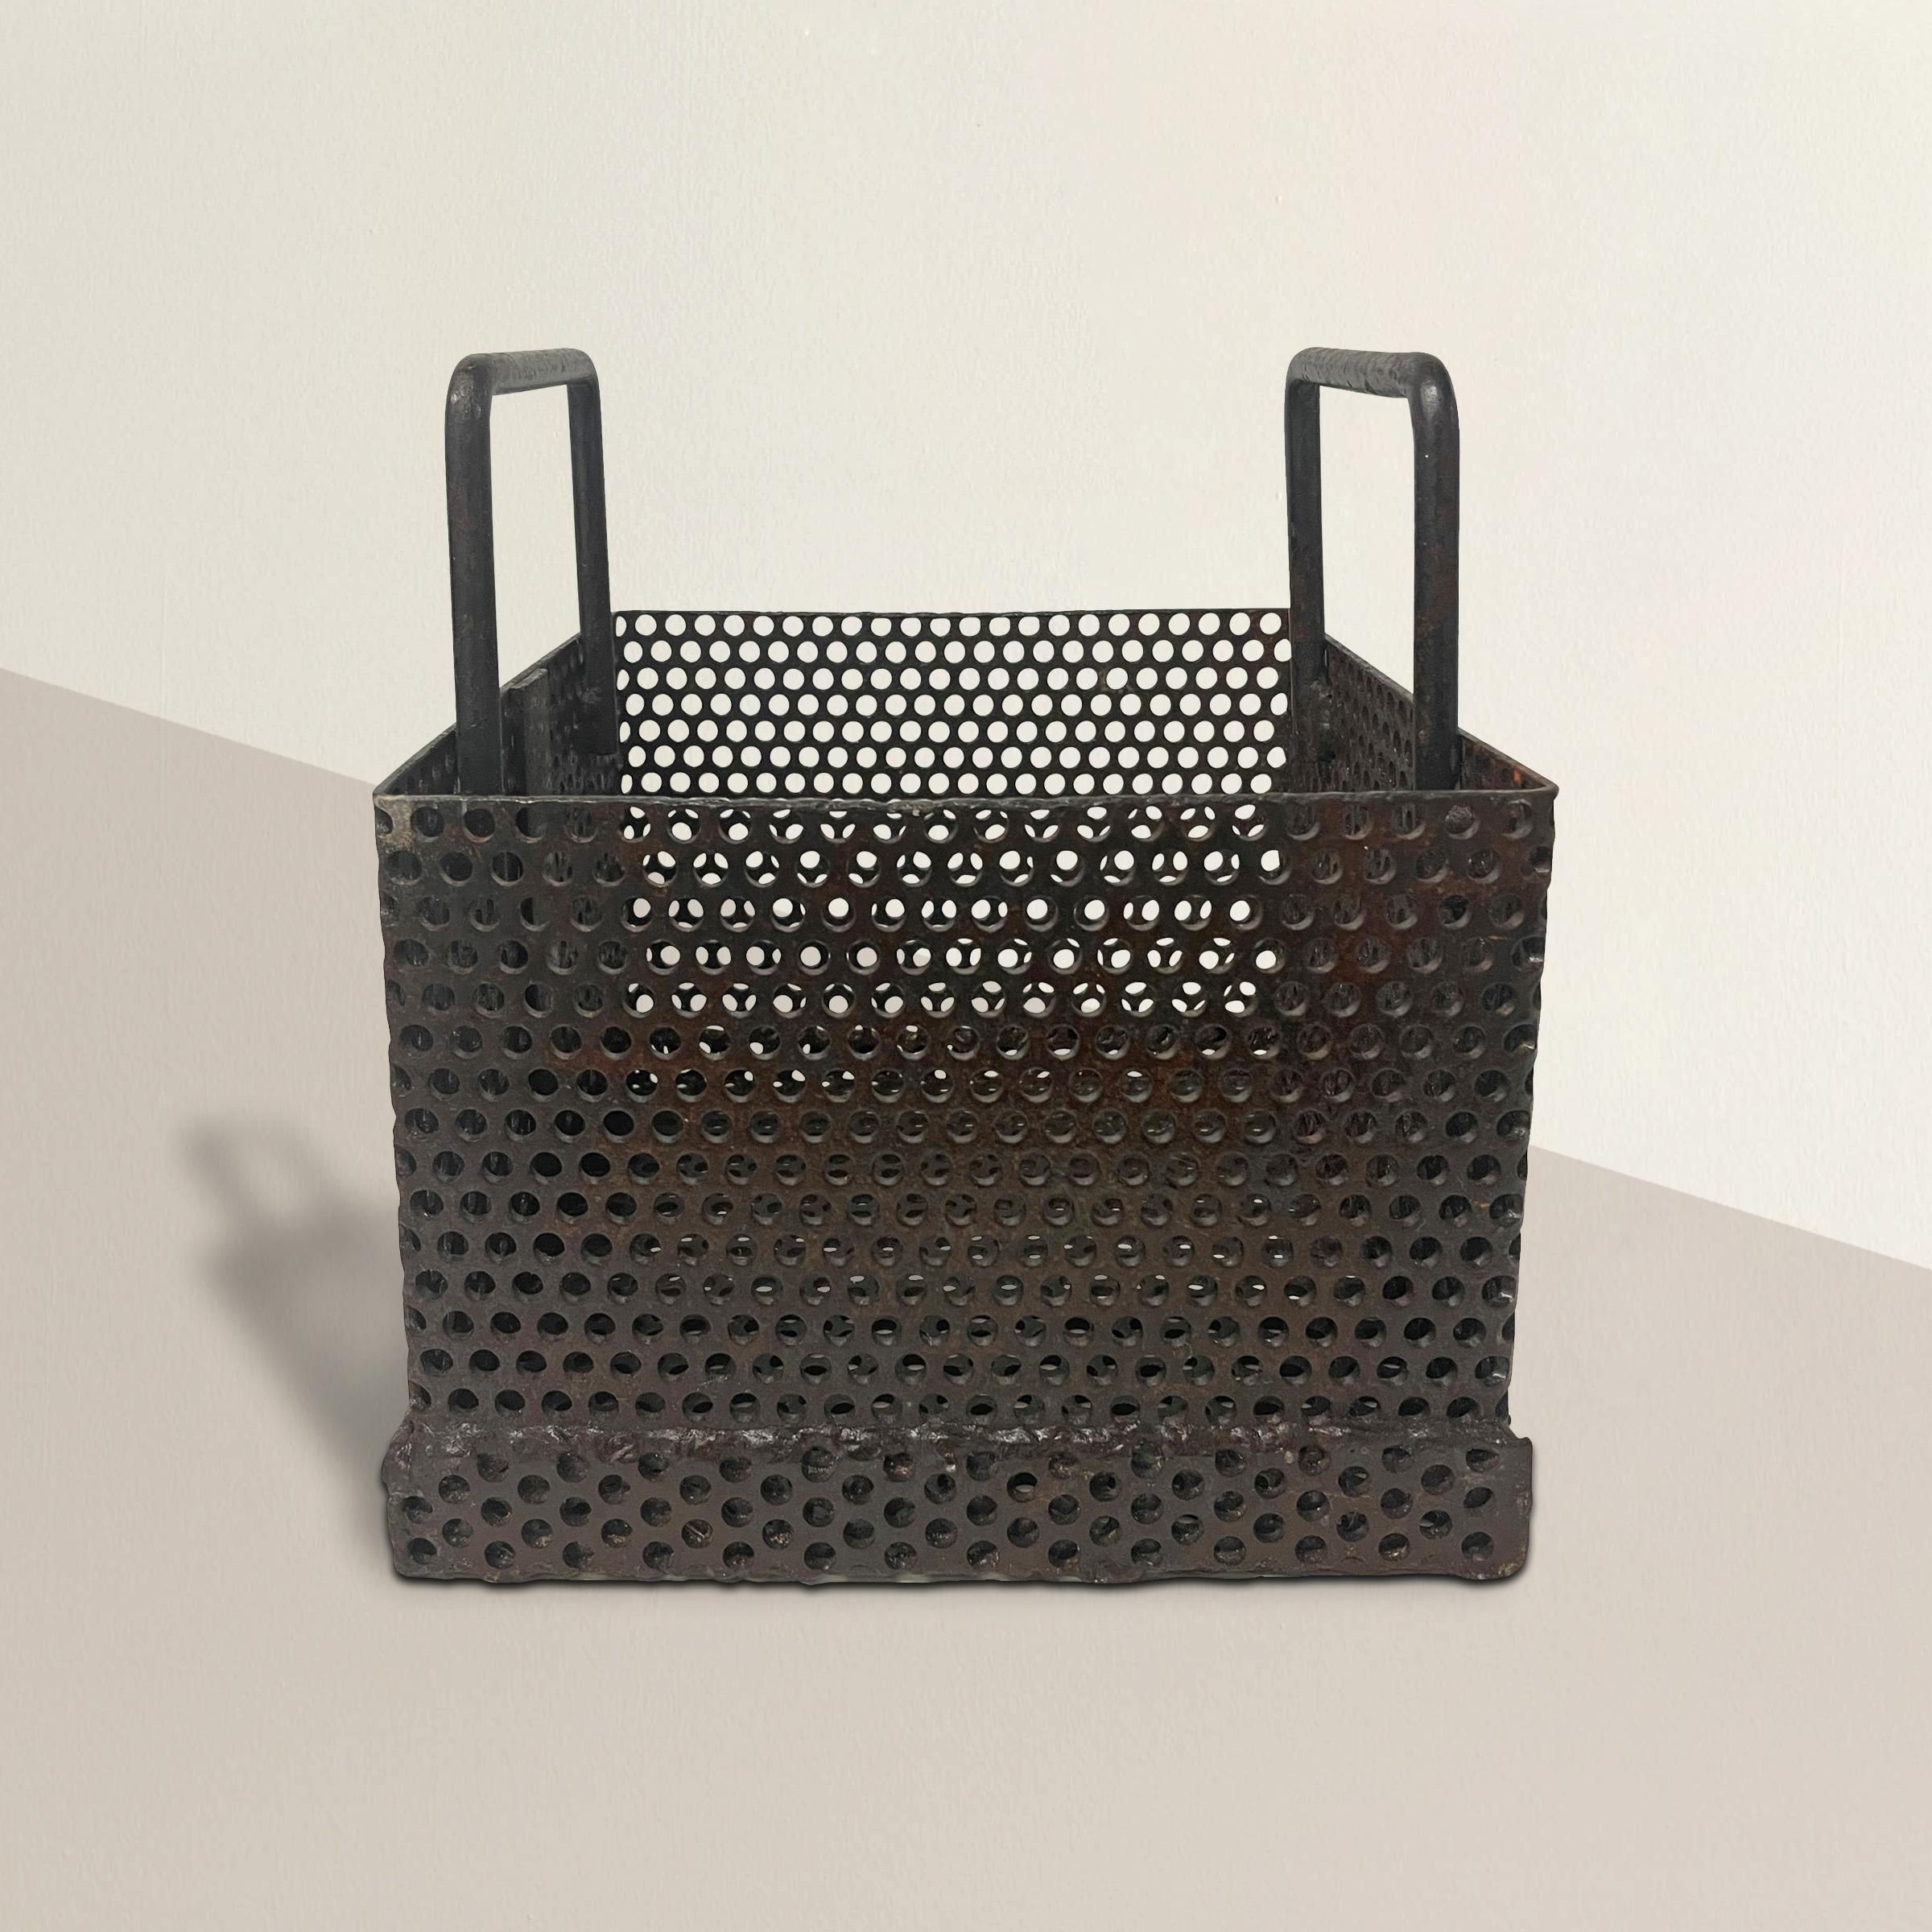 An incredible early 20th century American industrial steel basket with pierced sides and two bent steel handles. This basket was probably used to filter something, with the holes allowing water to pass freely, but today it's the perfect small